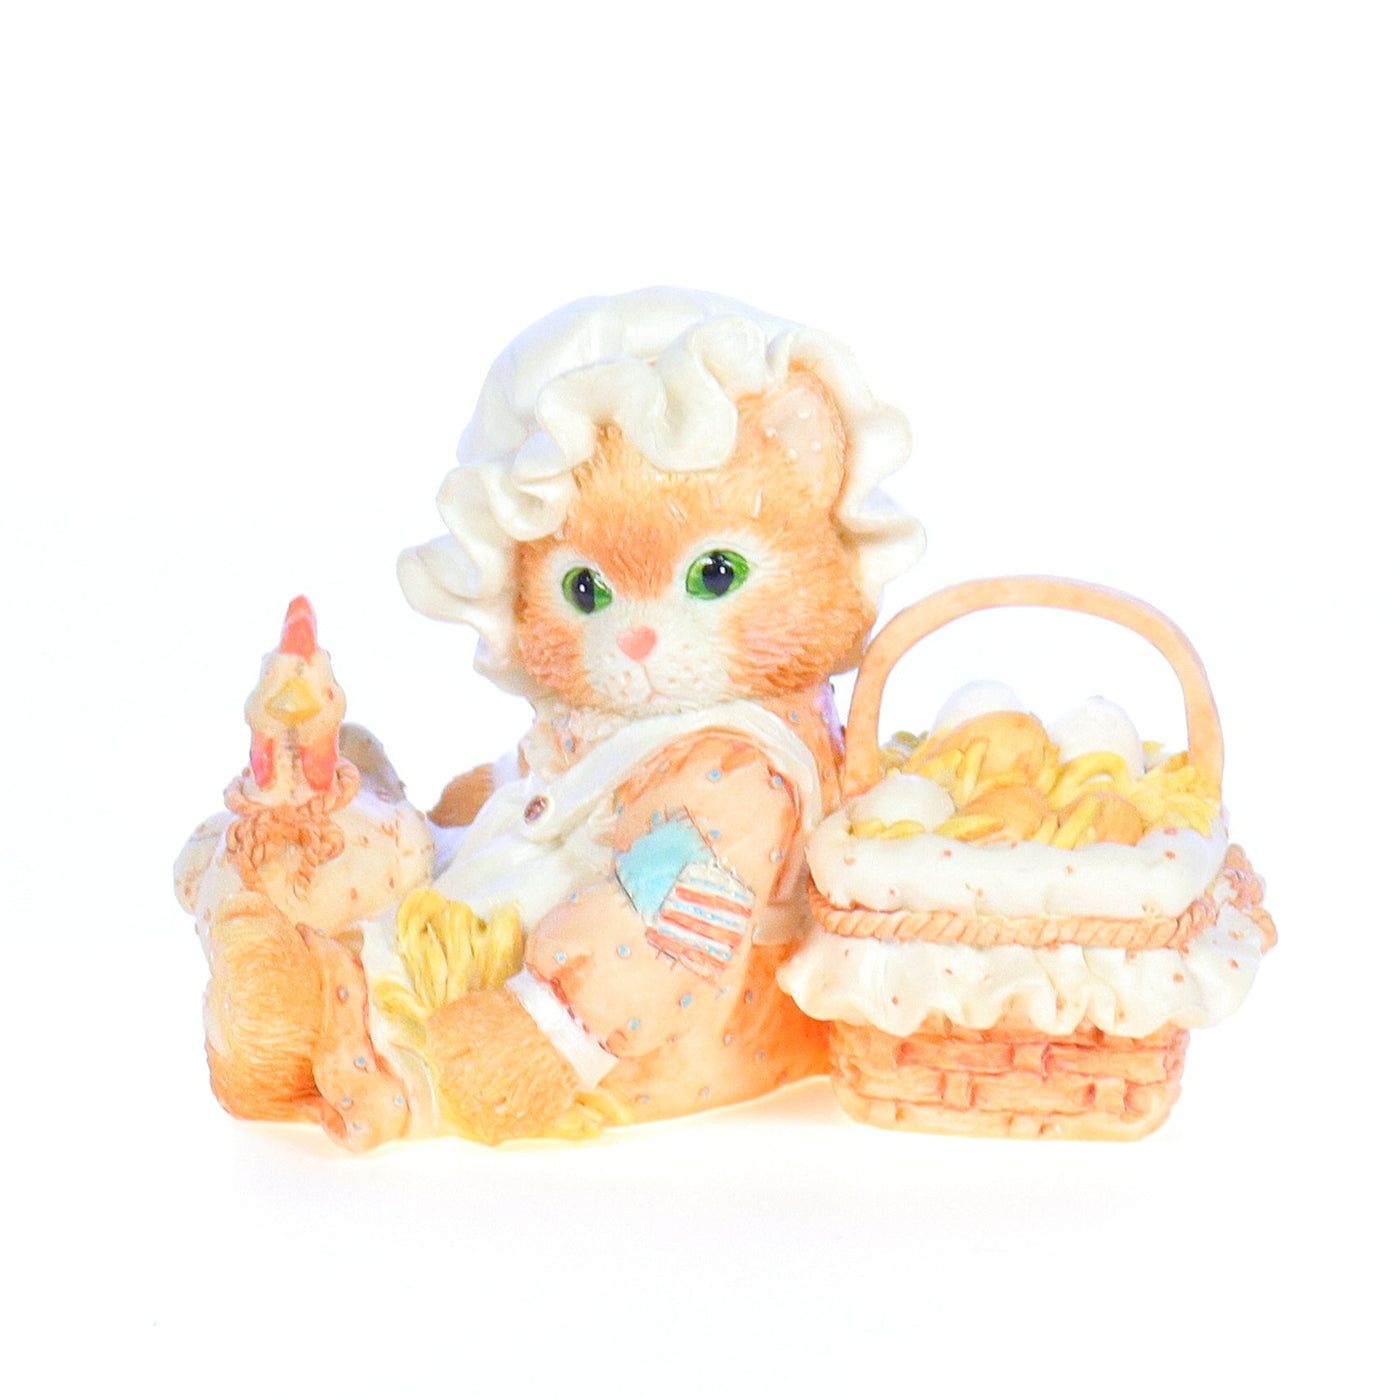 Calico_Kittens_Friendship_is_the_Best_Blessing_Spring_Figurine_1994